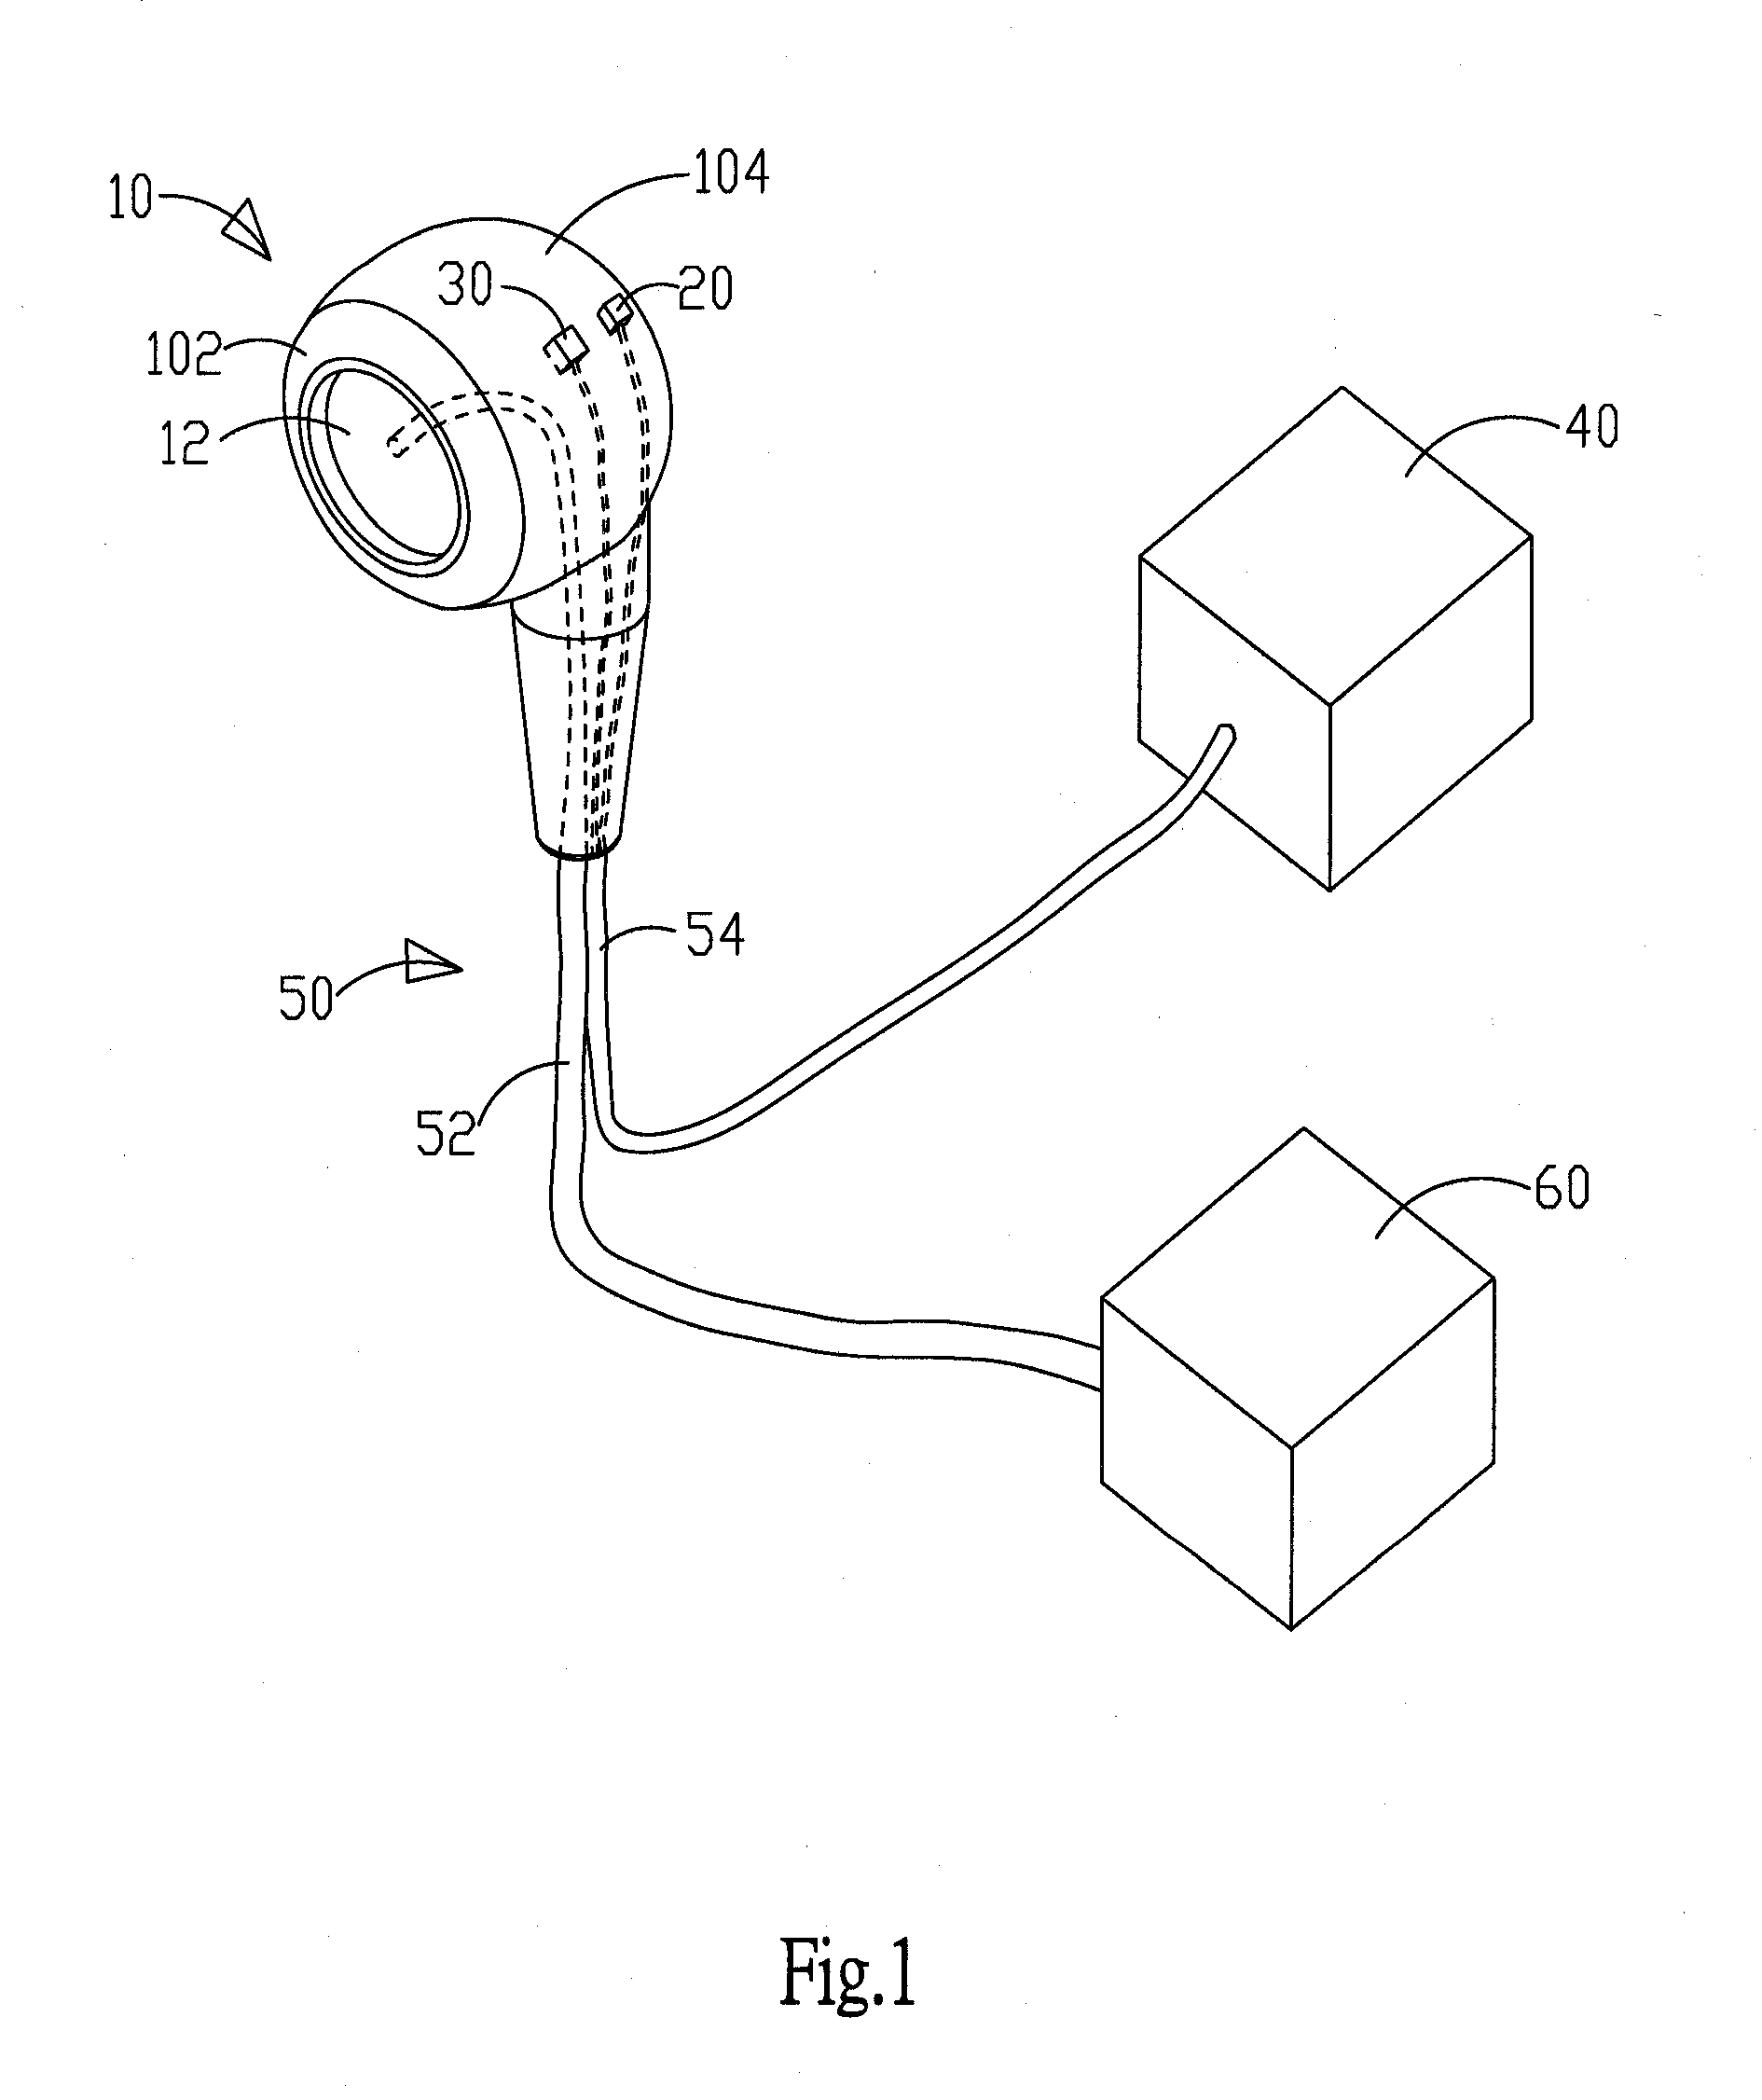 Apparatus for measurement of heart rate variability